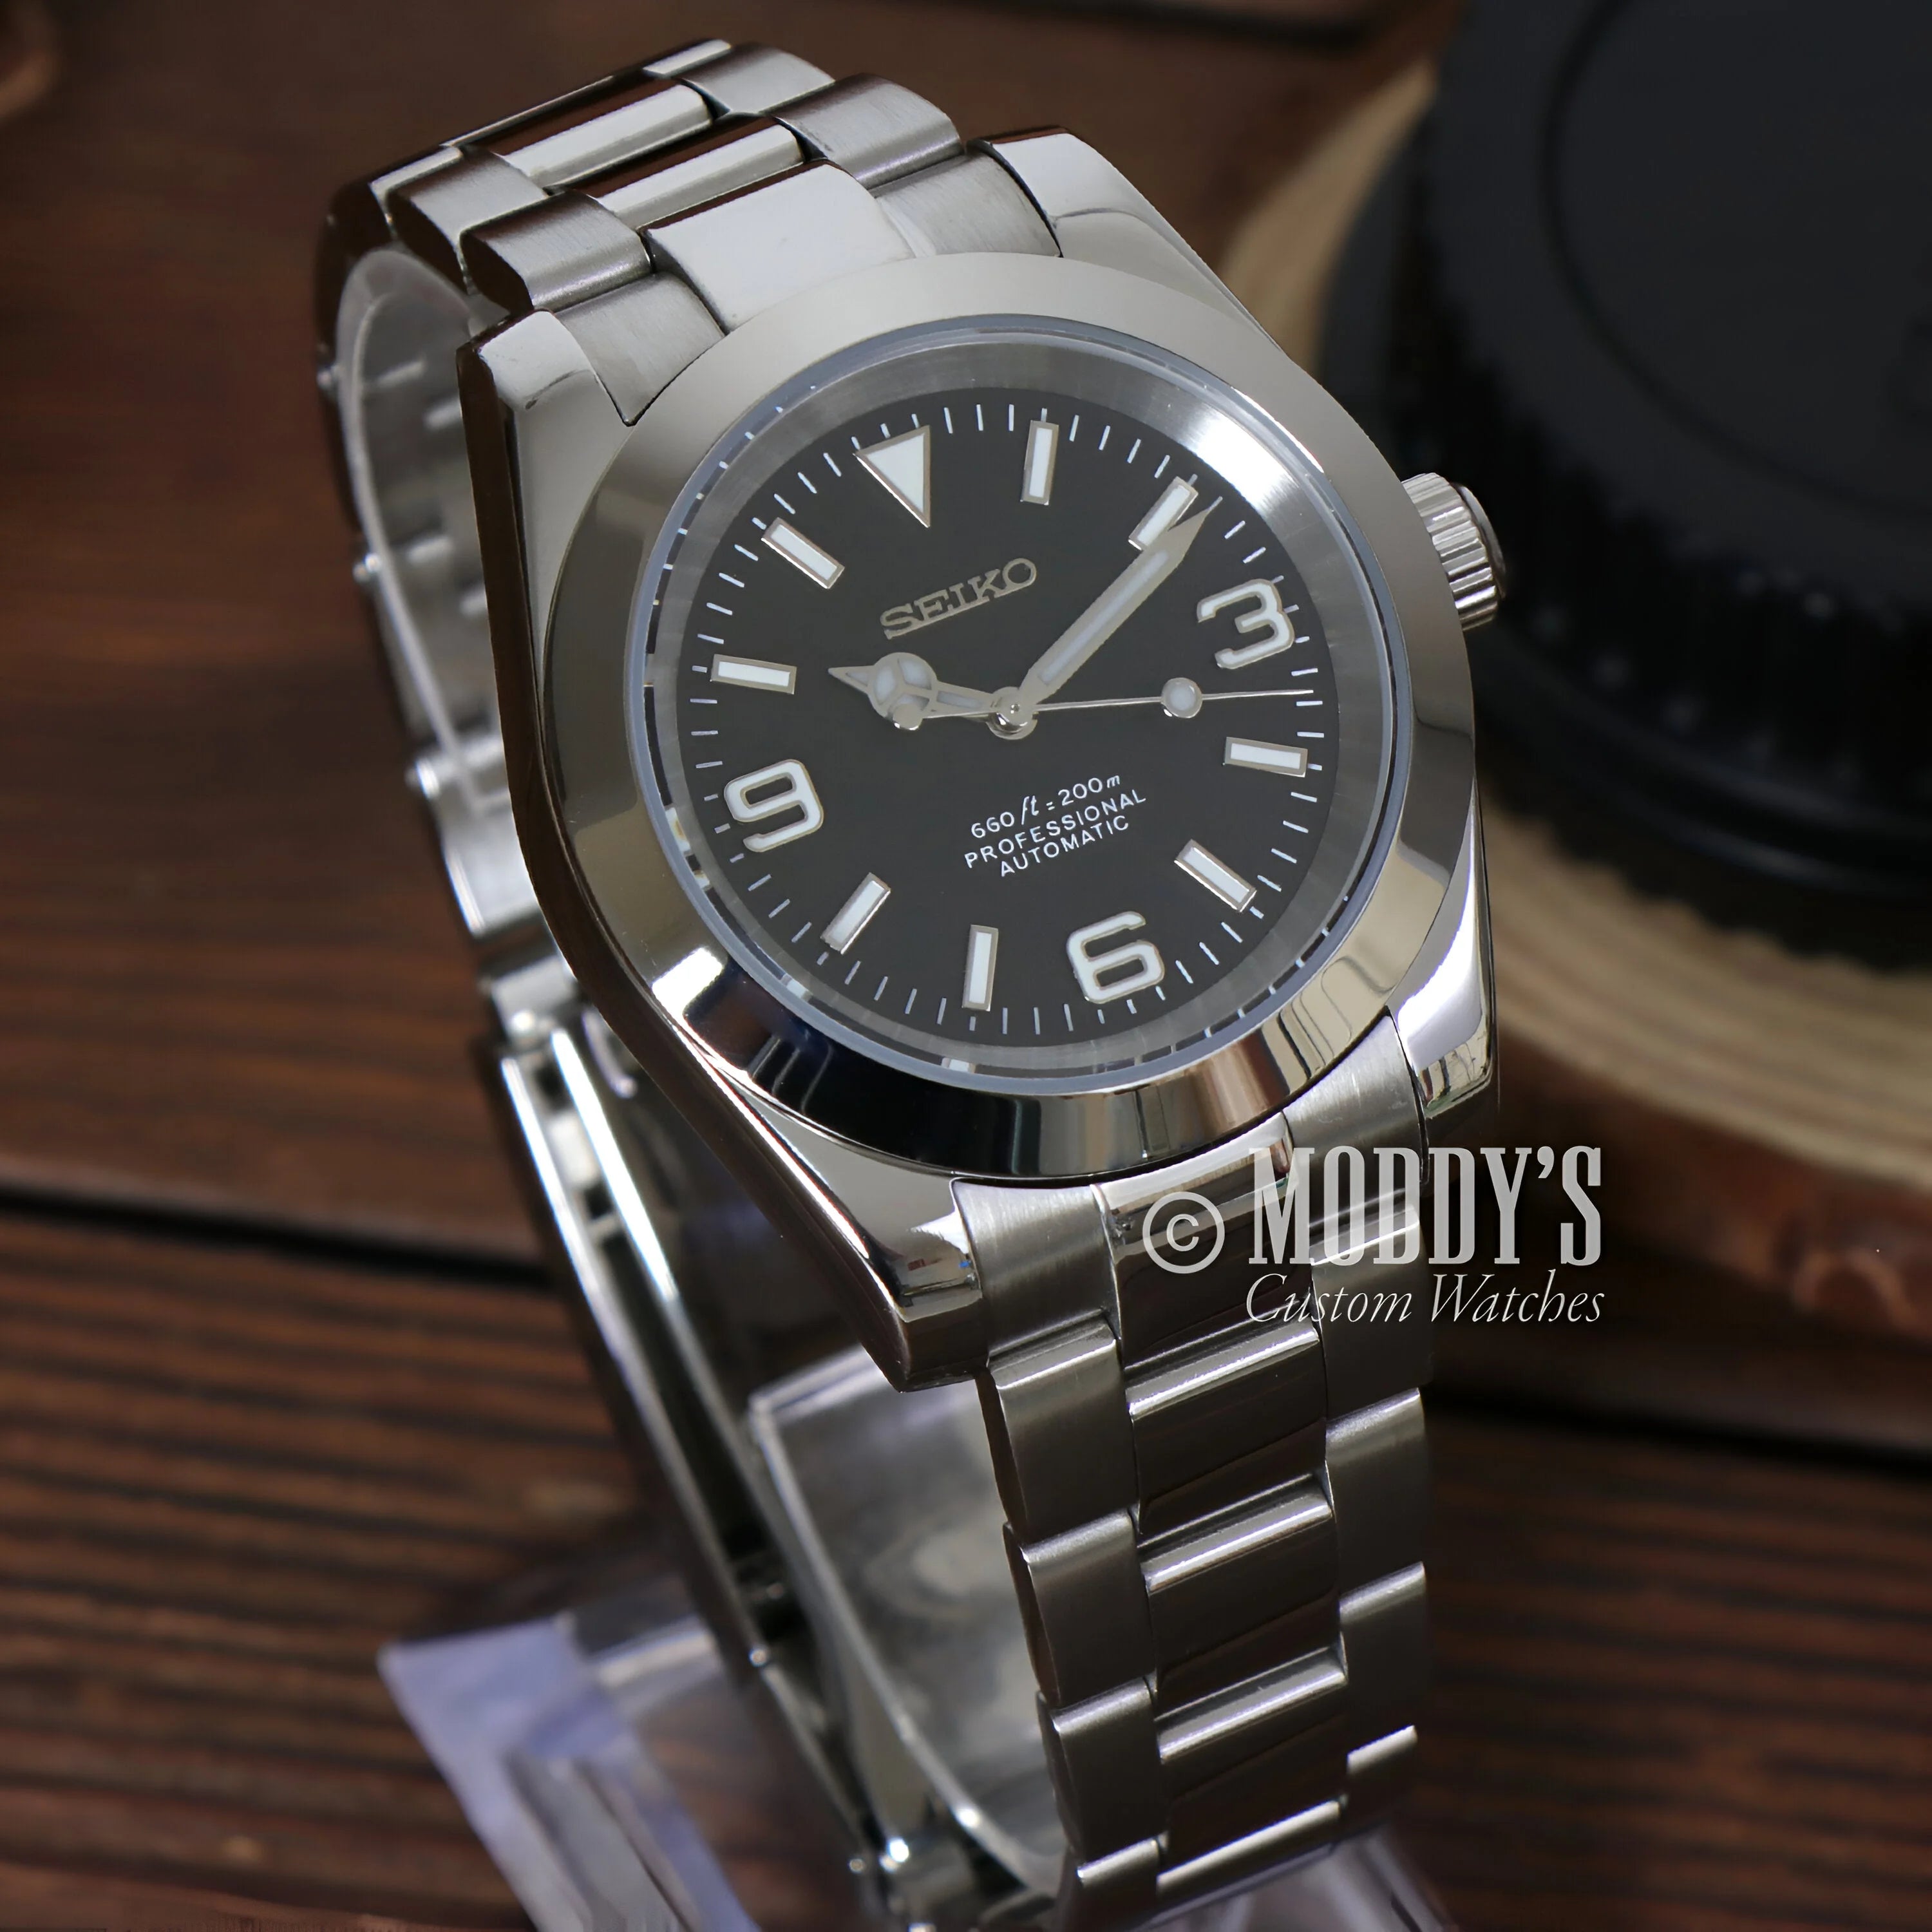 Seiko Mod Oyster Black Explorer With Stainless Steel, Black Dial, And Prominent Hour Markers